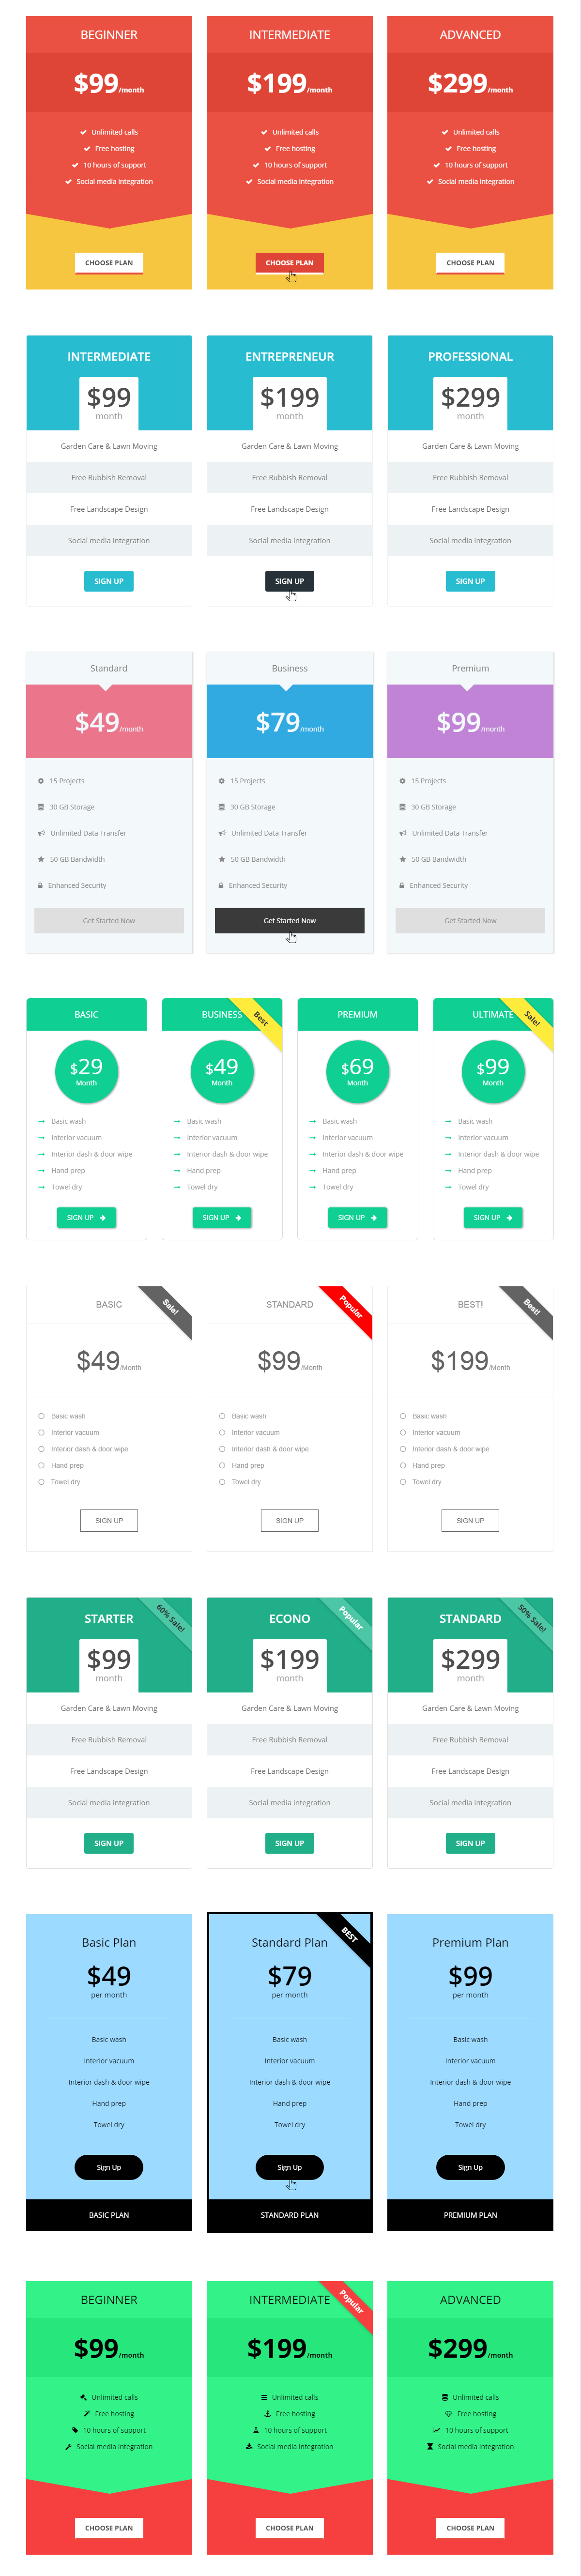 Example of pricing tables - Pro version